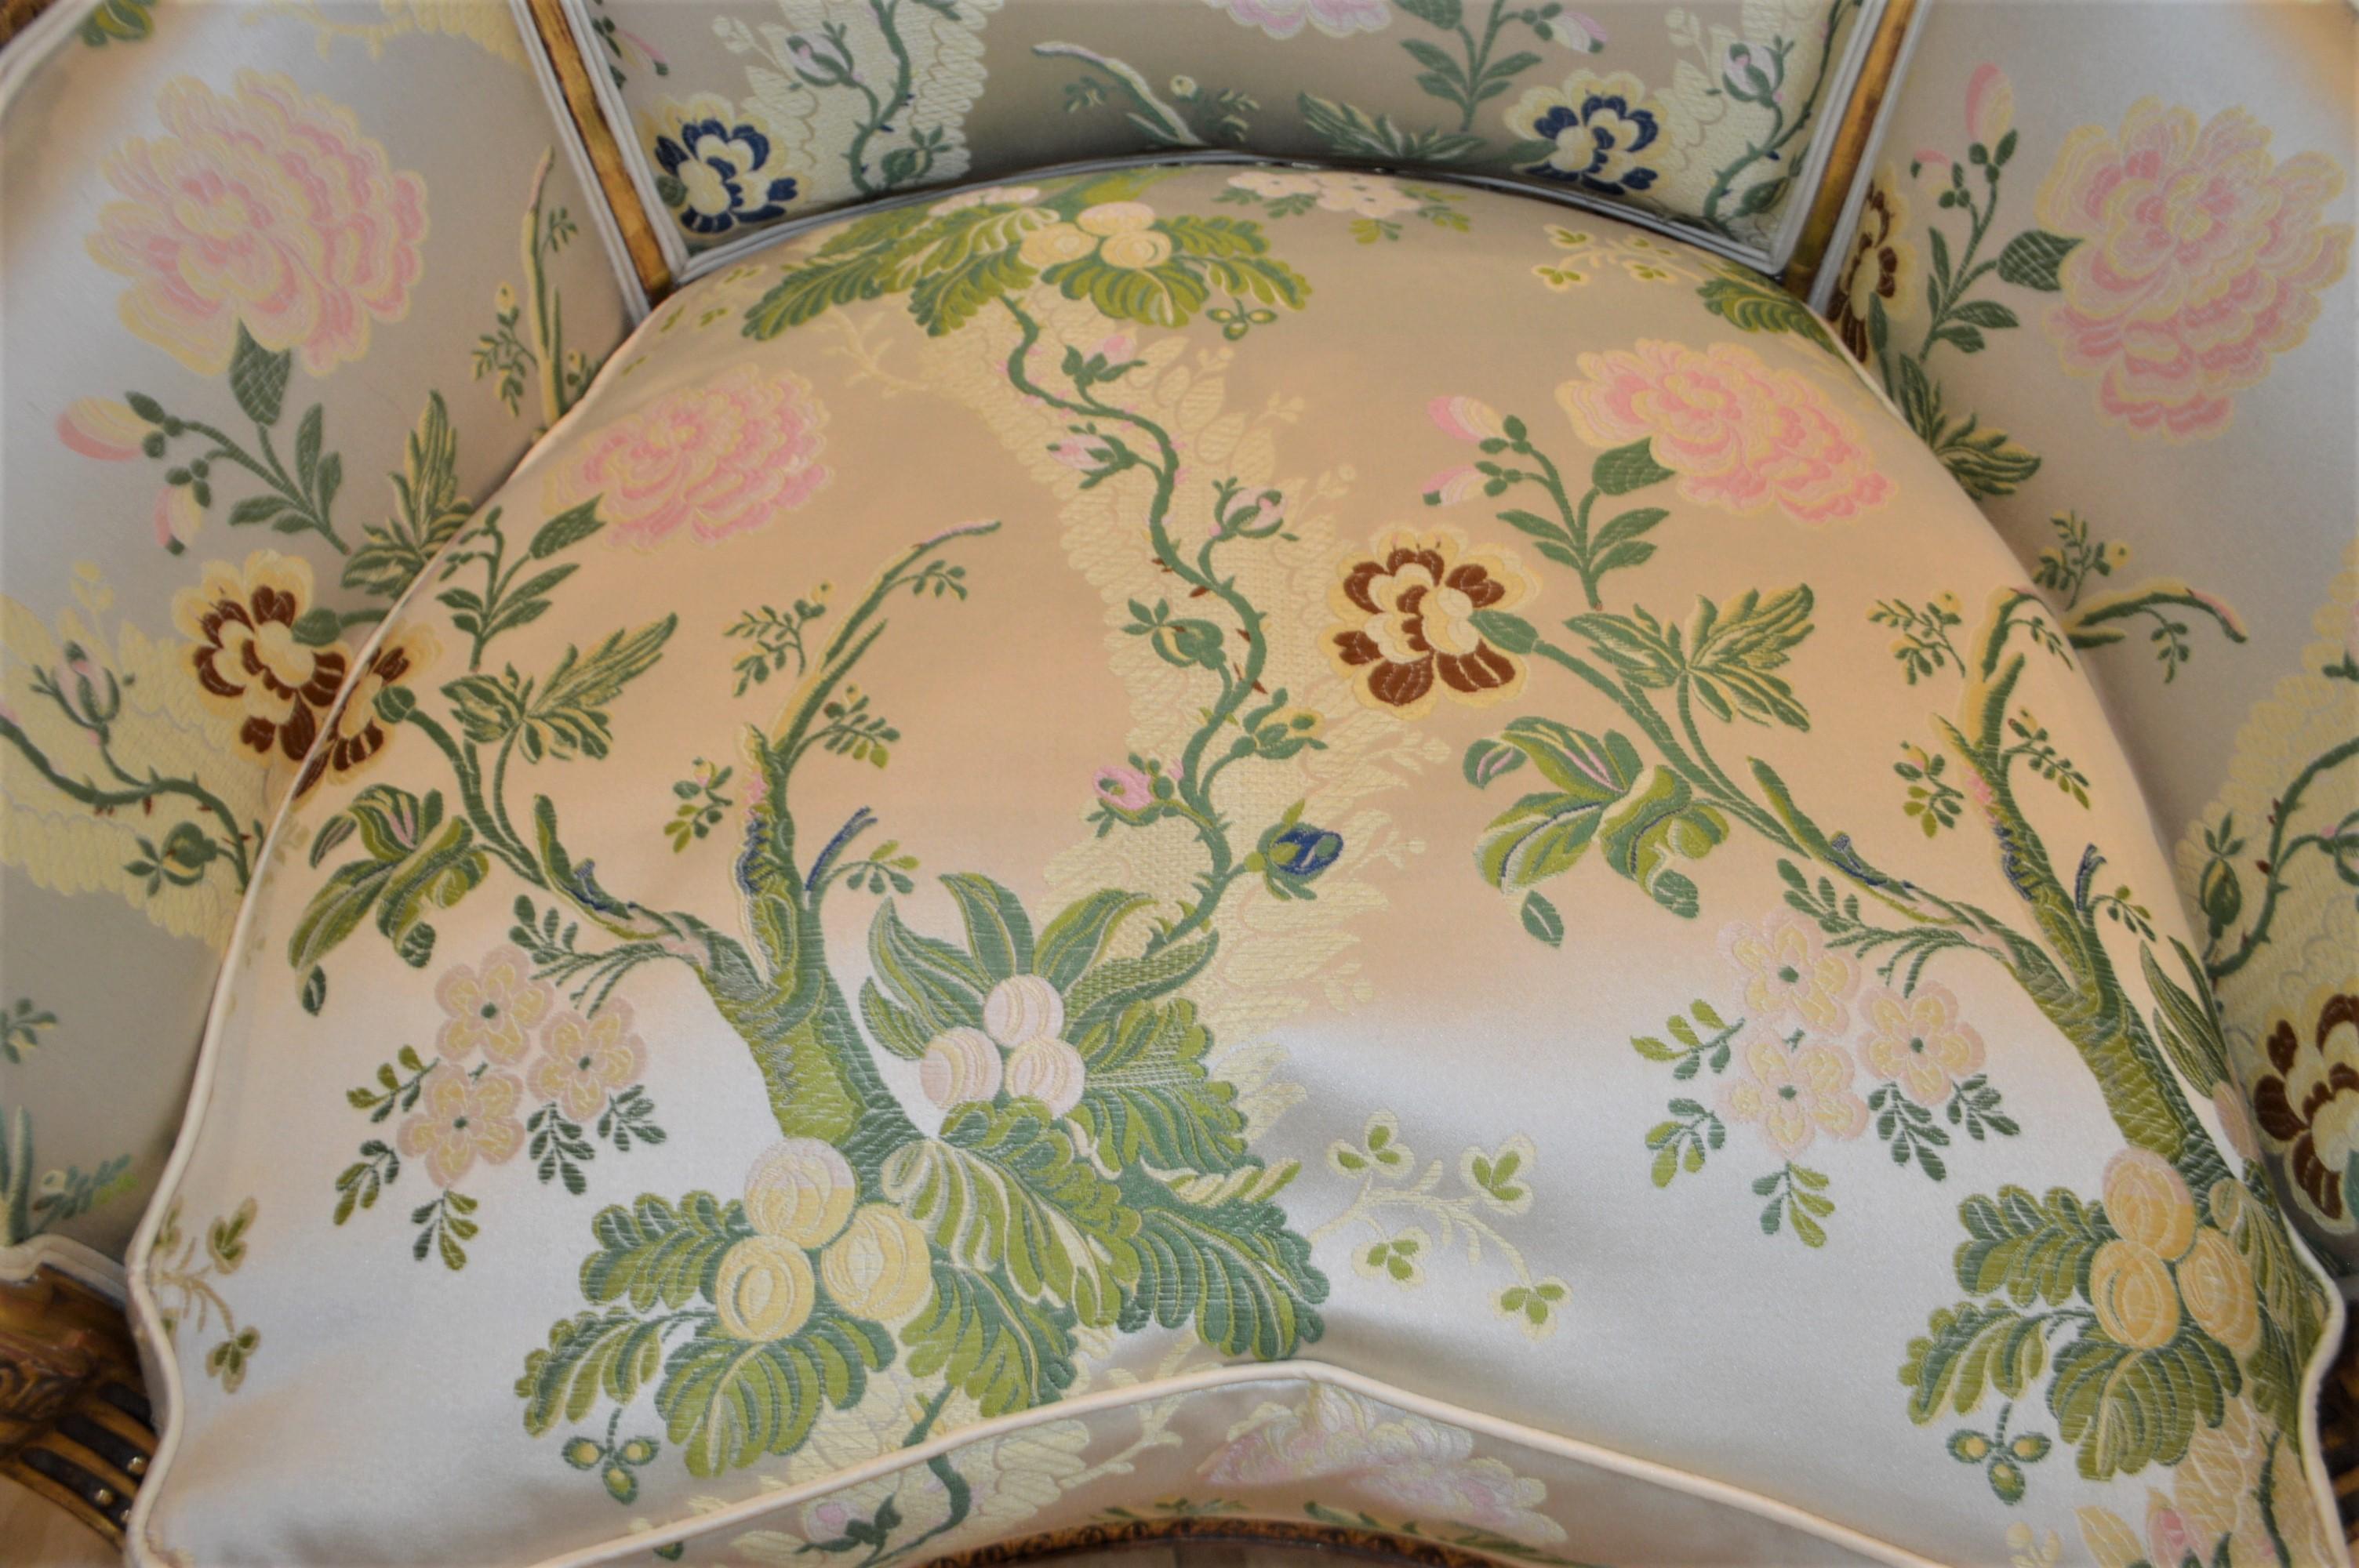 Wood Louis XVI style leaf gilded bergere chair, hand carved, silk botanical fabric.